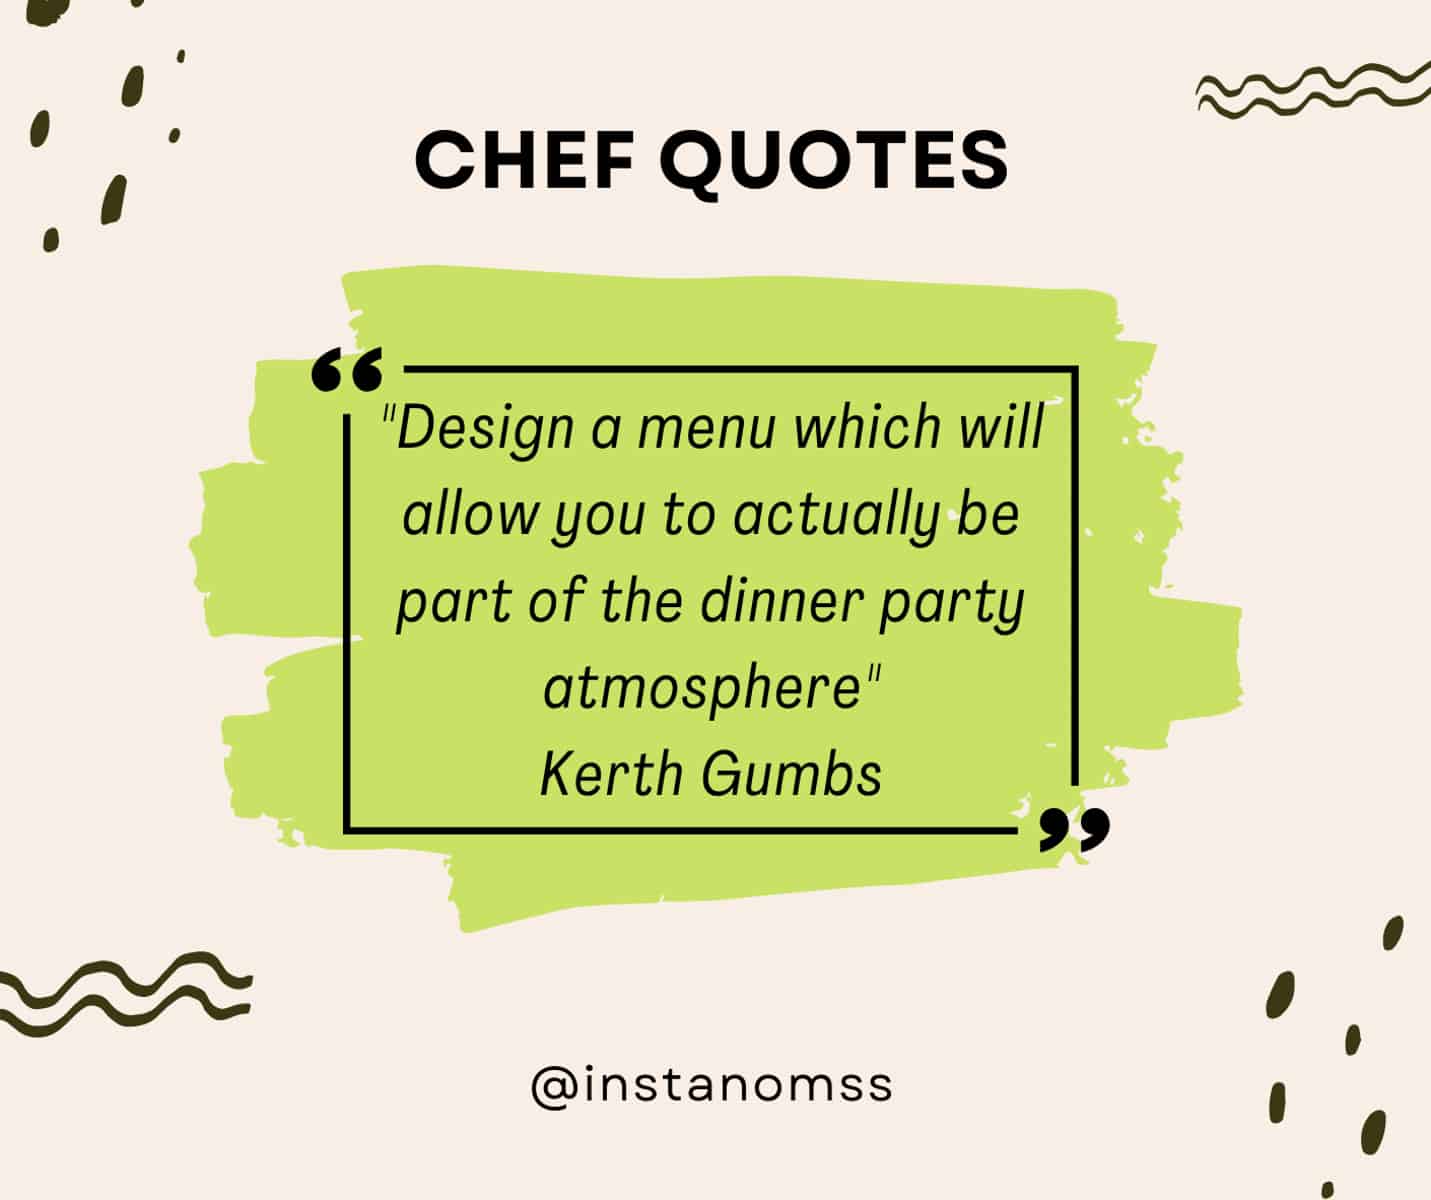 "Design a menu which will allow you to actually be part of the dinner party atmosphere" Kerth Gumbs